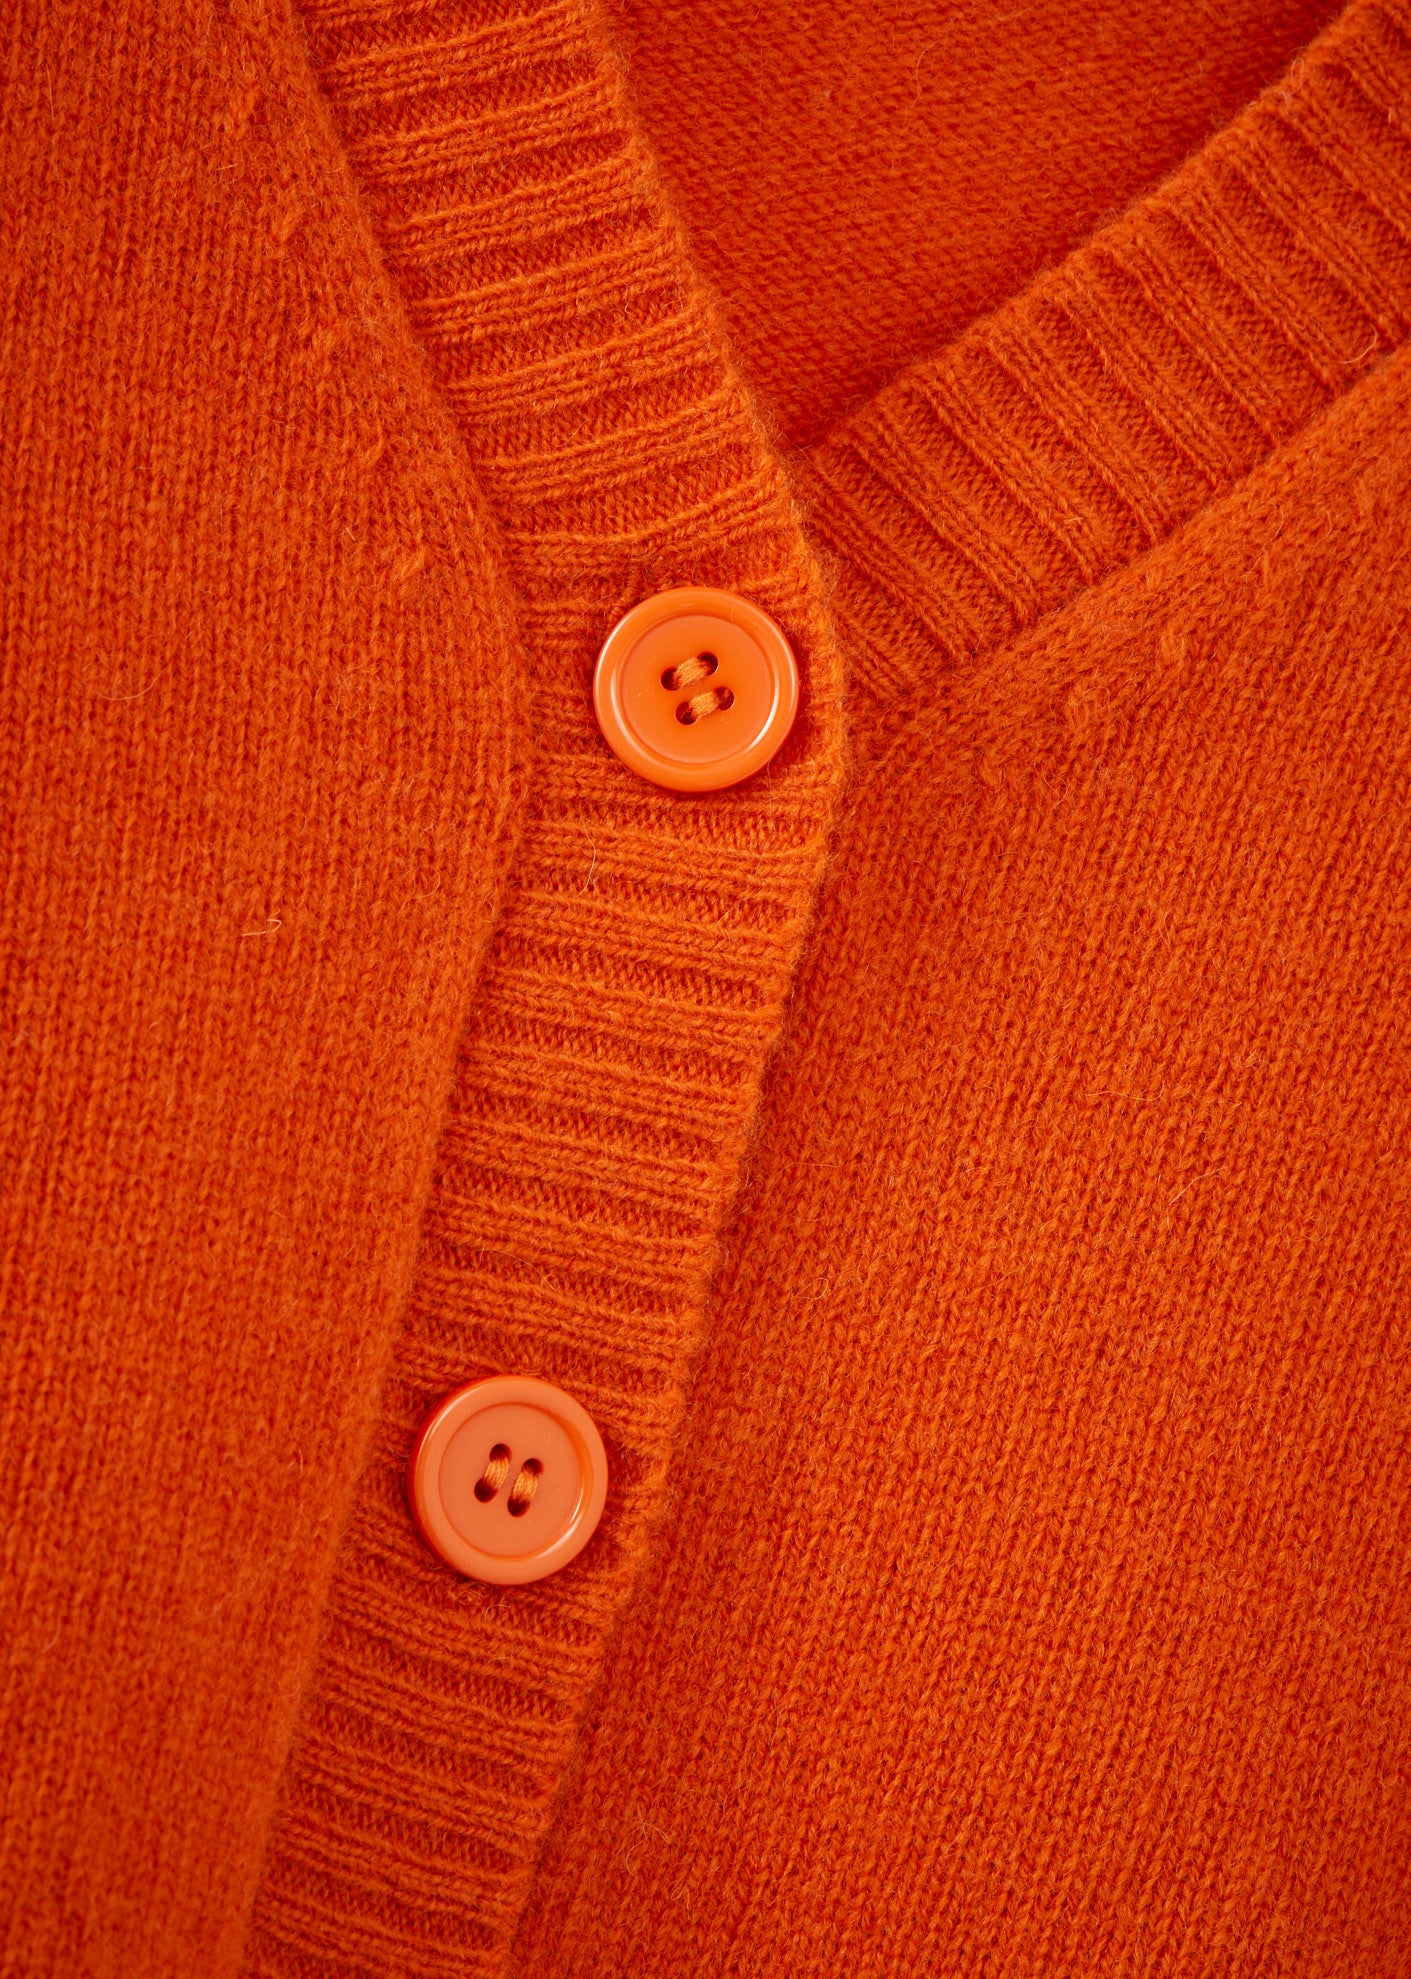 COPPER PARTY CARDIGAN - CLEMENTINE